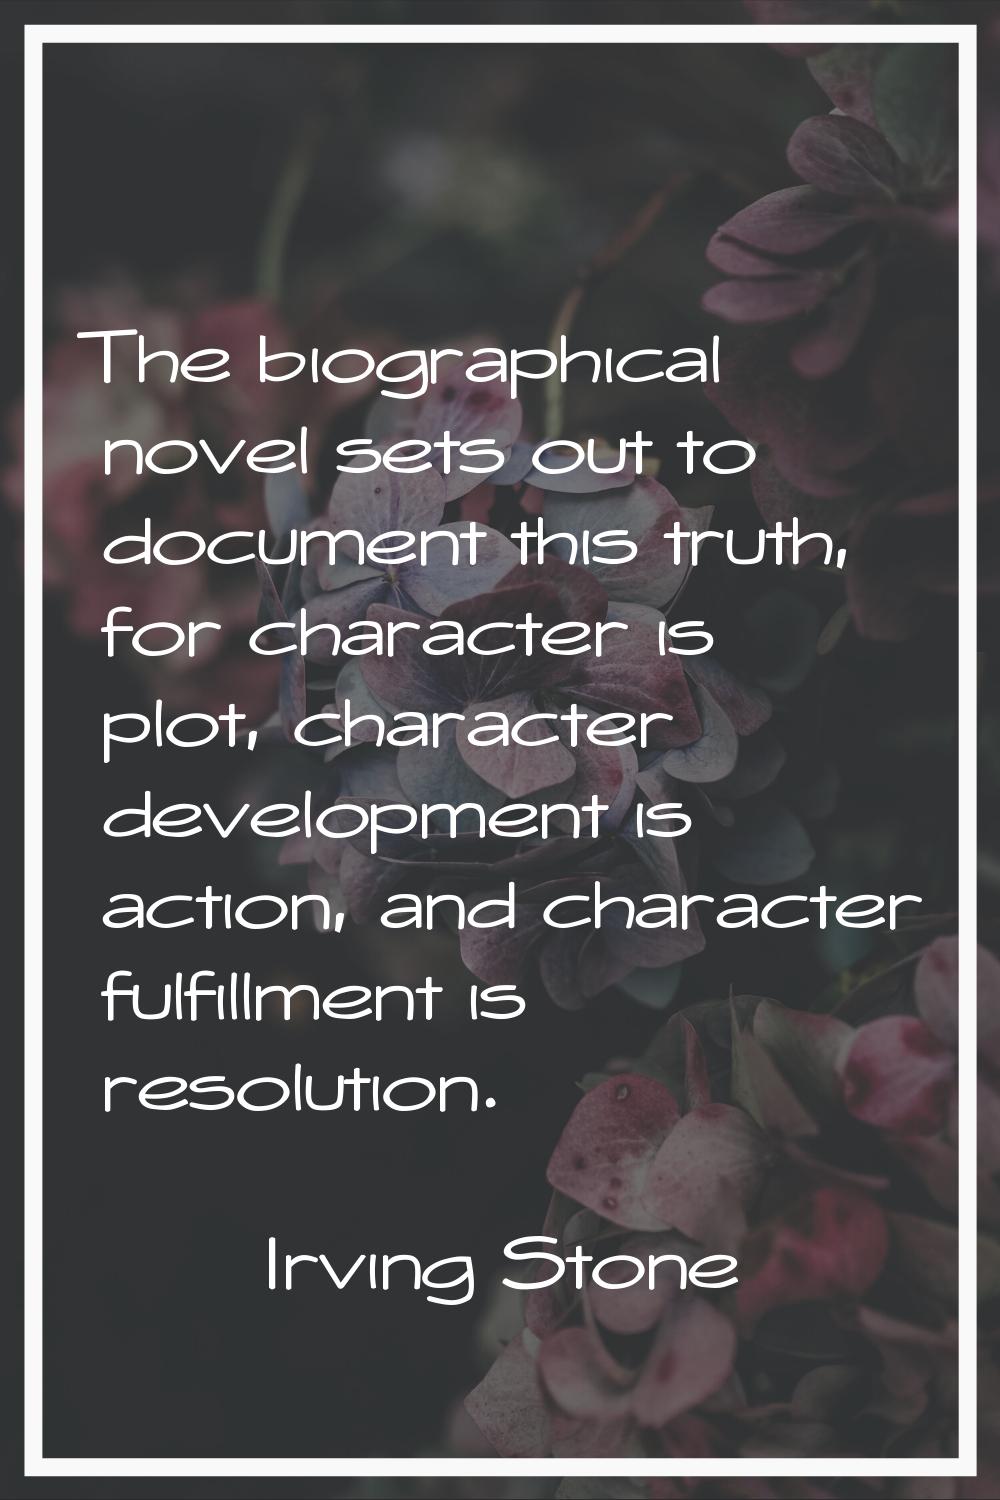 The biographical novel sets out to document this truth, for character is plot, character developmen